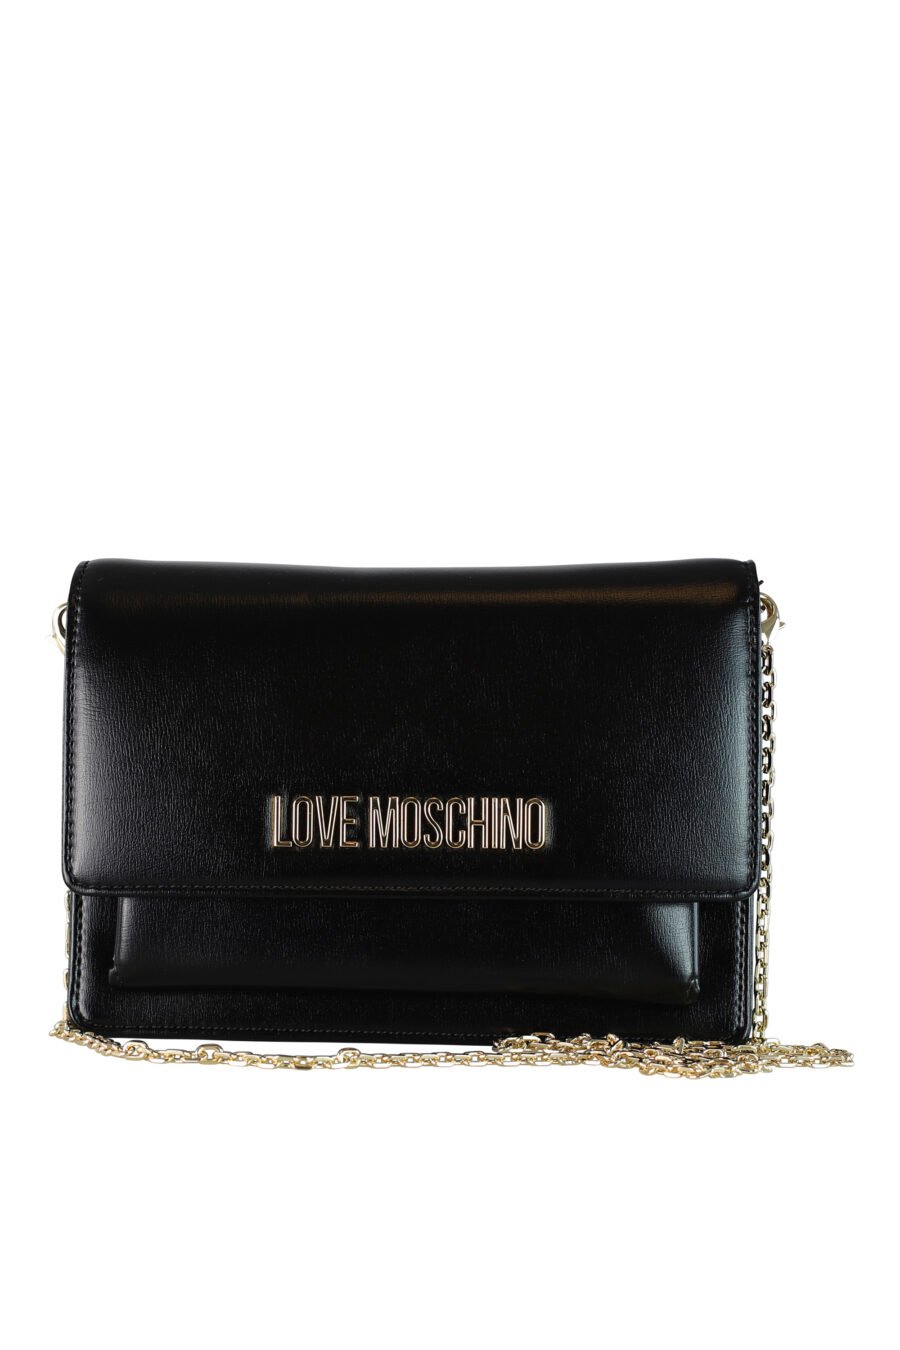 Black shoulder bag with chain and mini logo - IMG 0420